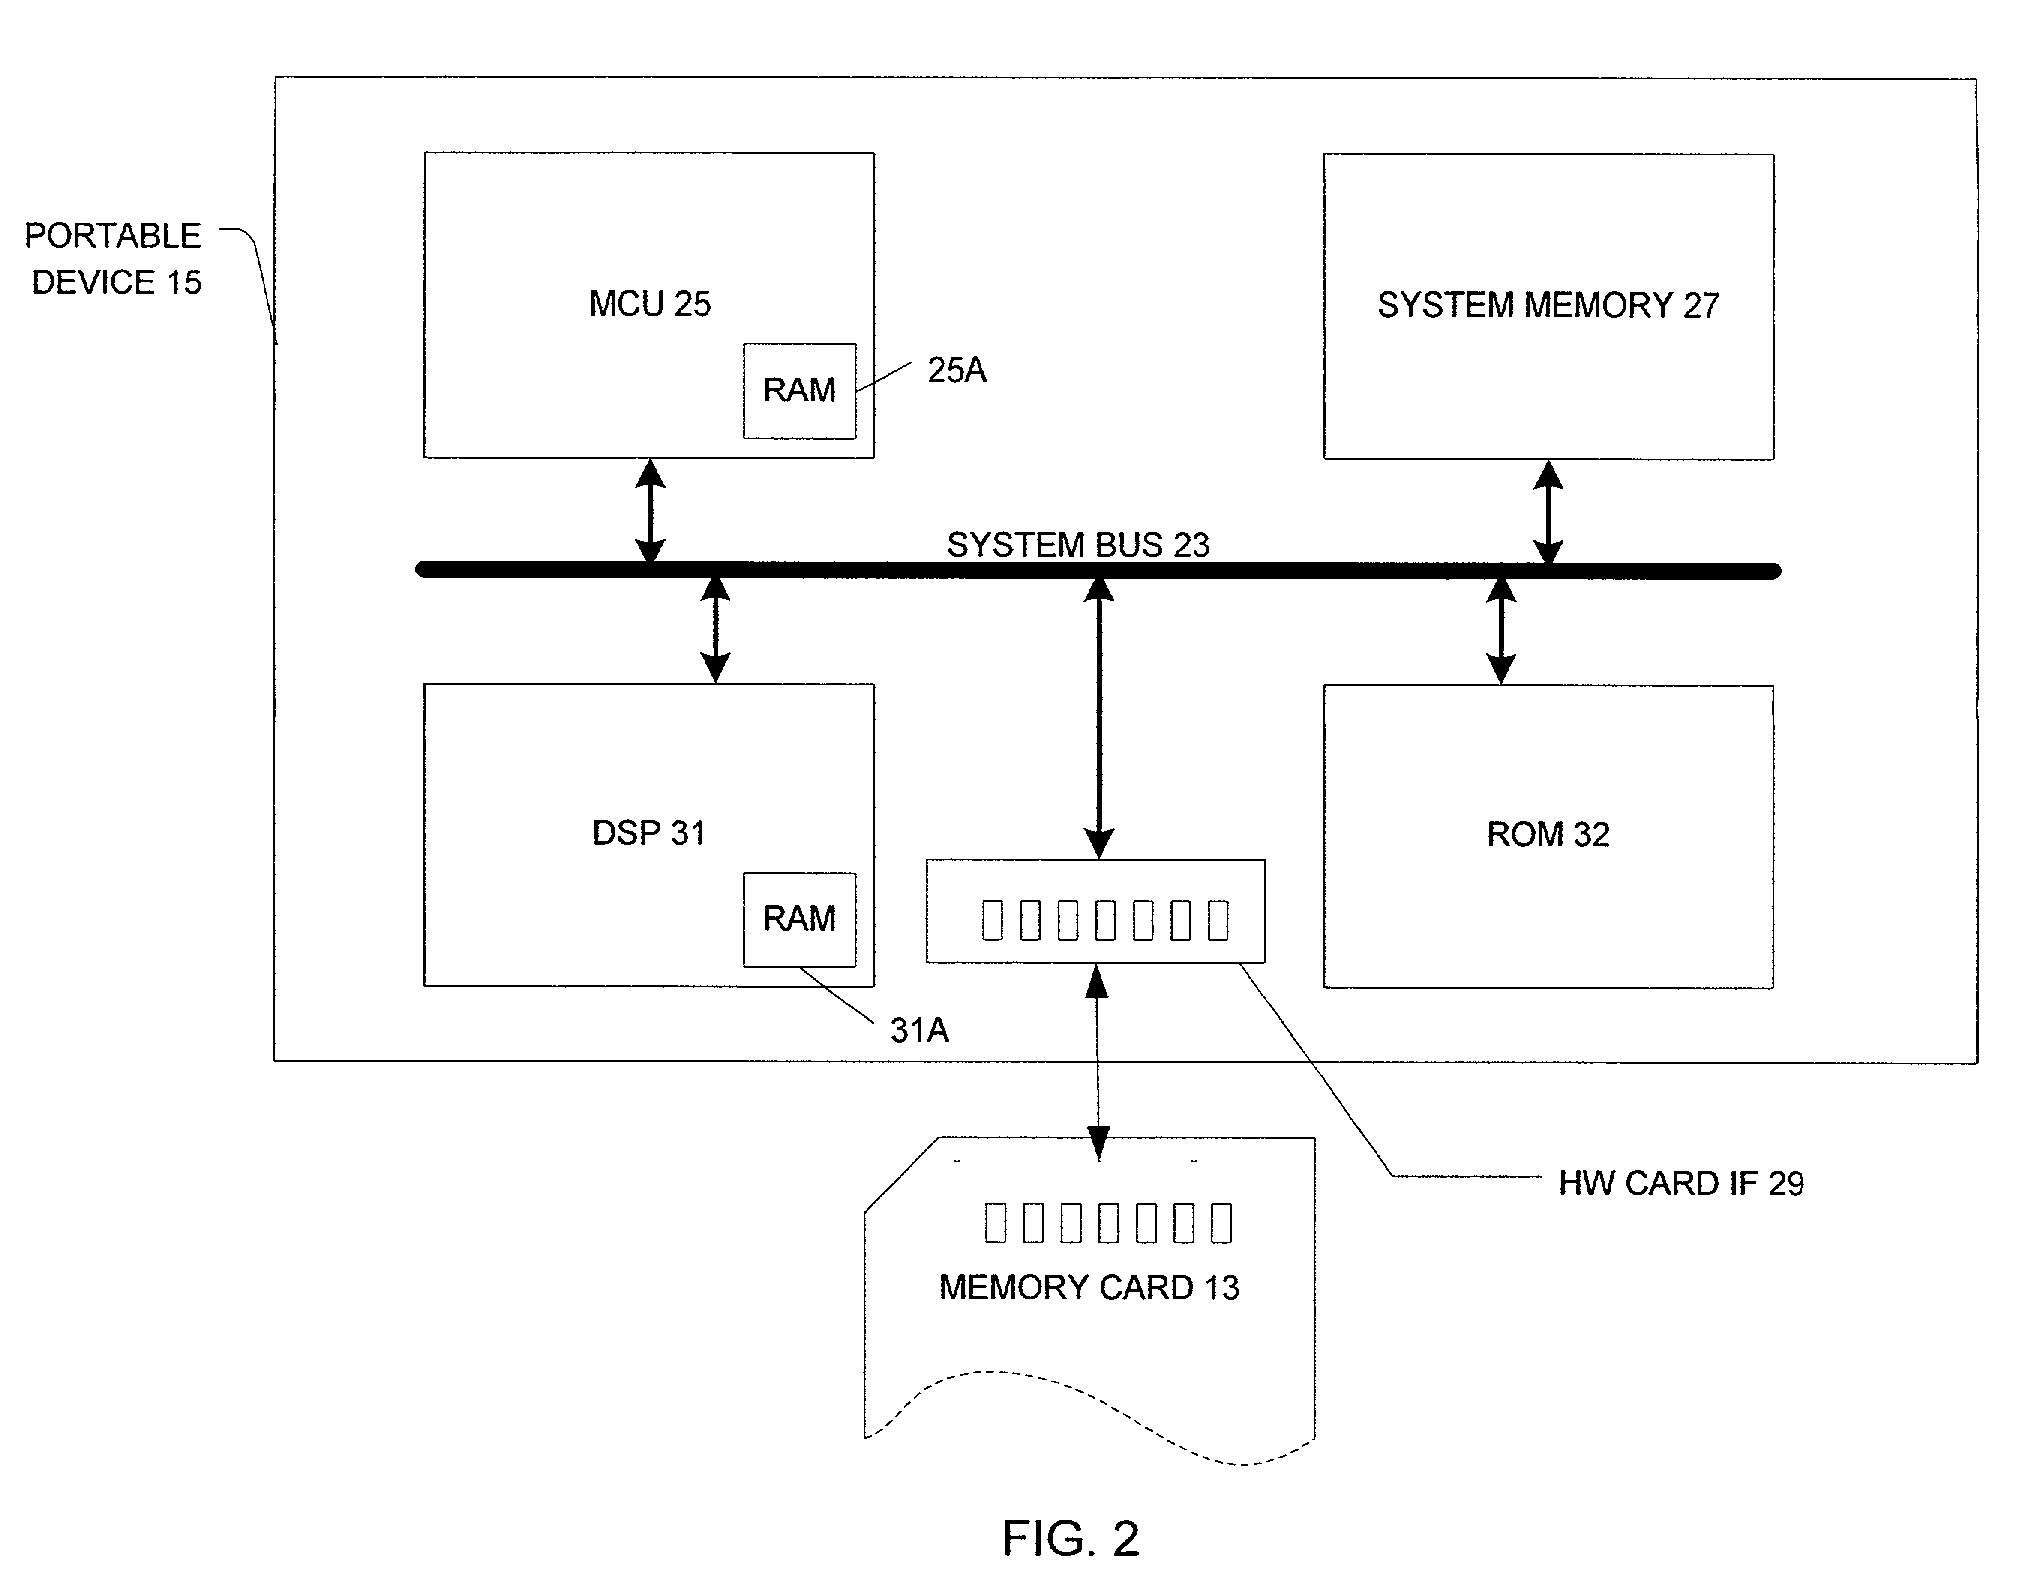 System, method, and device for playing back recorded audio, video or other content from non-volatile memory cards, compact disks or other media